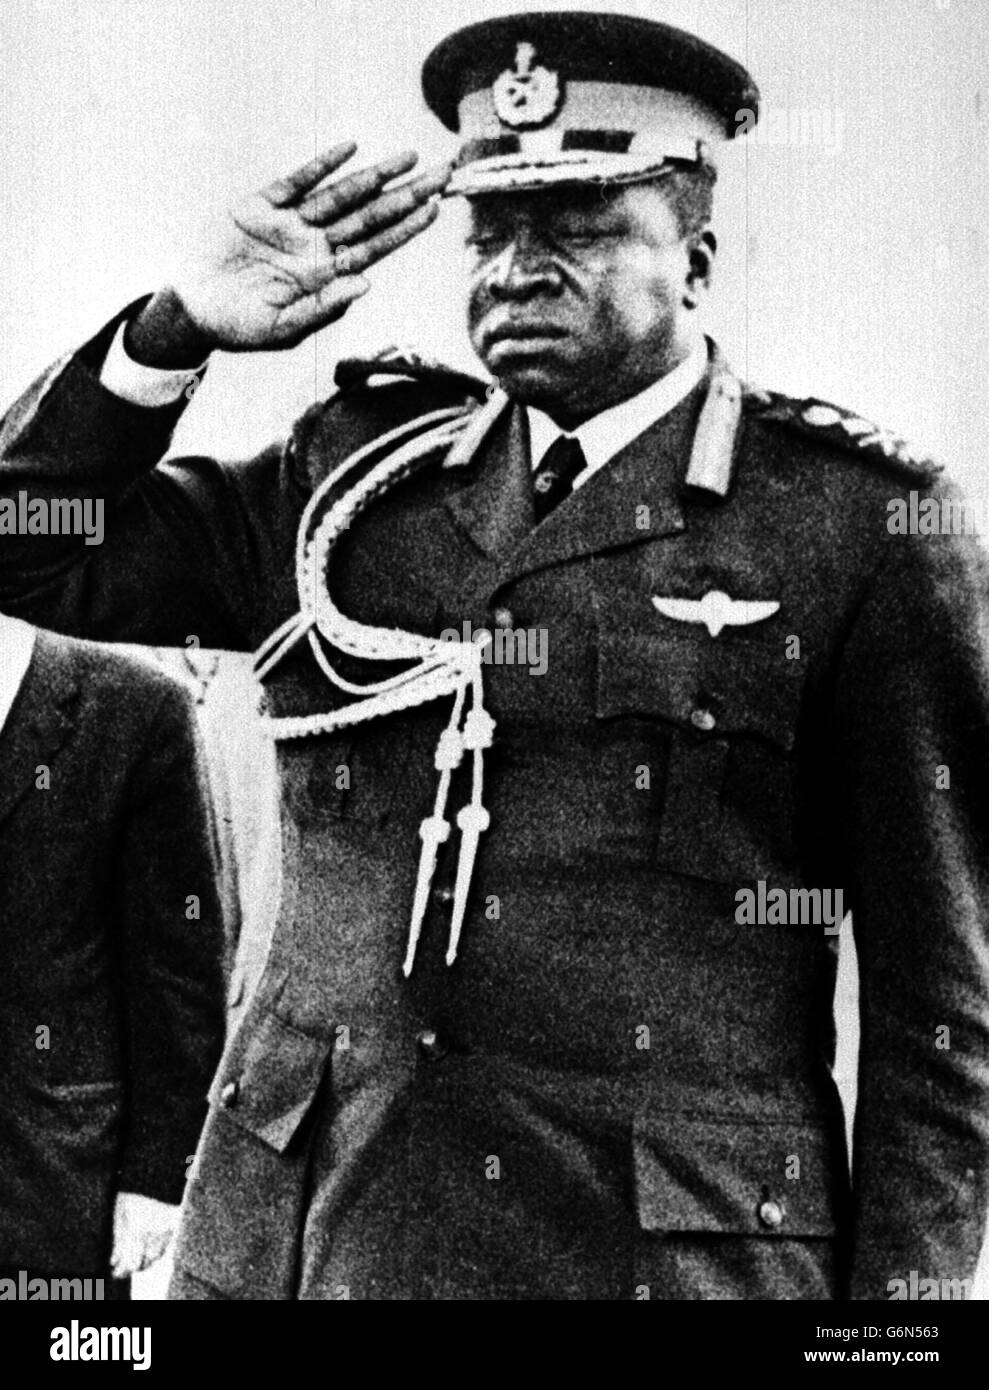 25th January - On this Day in History - 1971 On this day in 1971, General Idi Amin Dada seizes power in Uganda in a miltary coup. Stock Photo